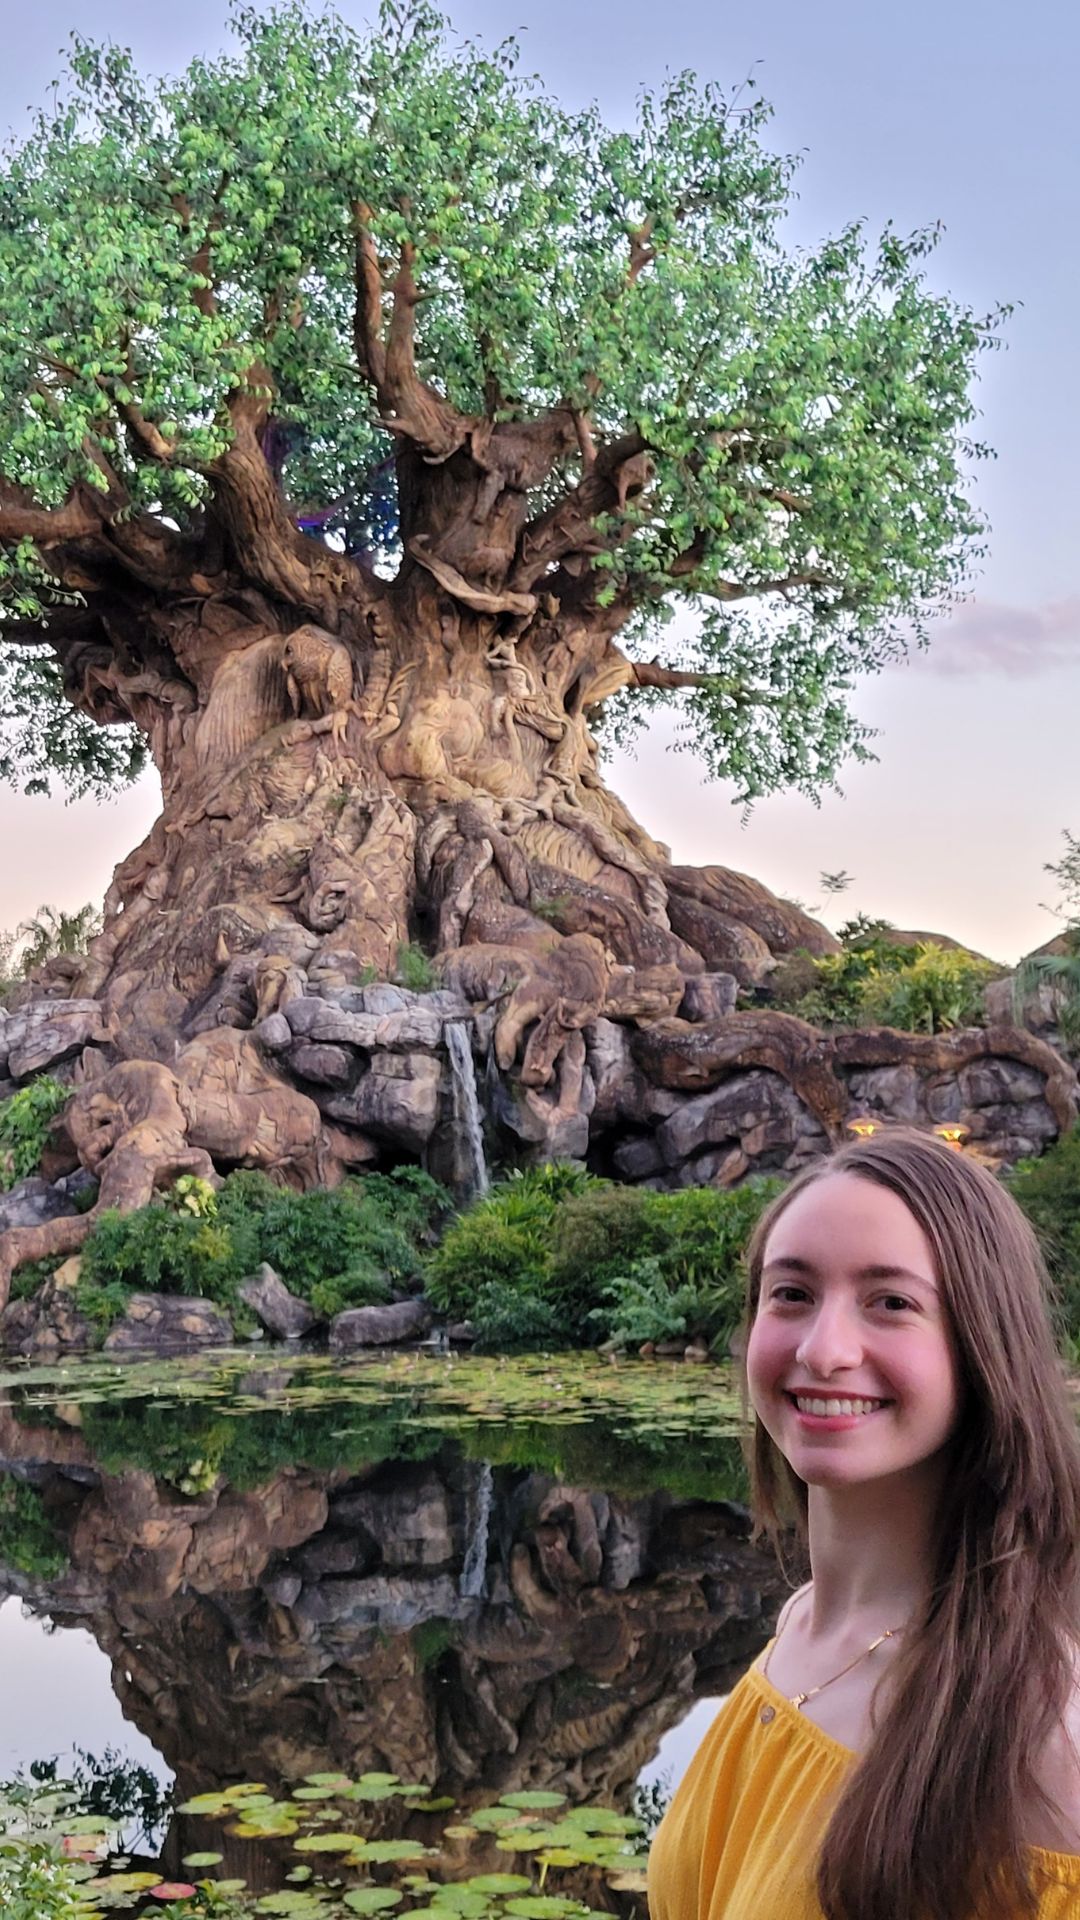 Salma Marzouk smiling, standing in front of a tree in Orlando.